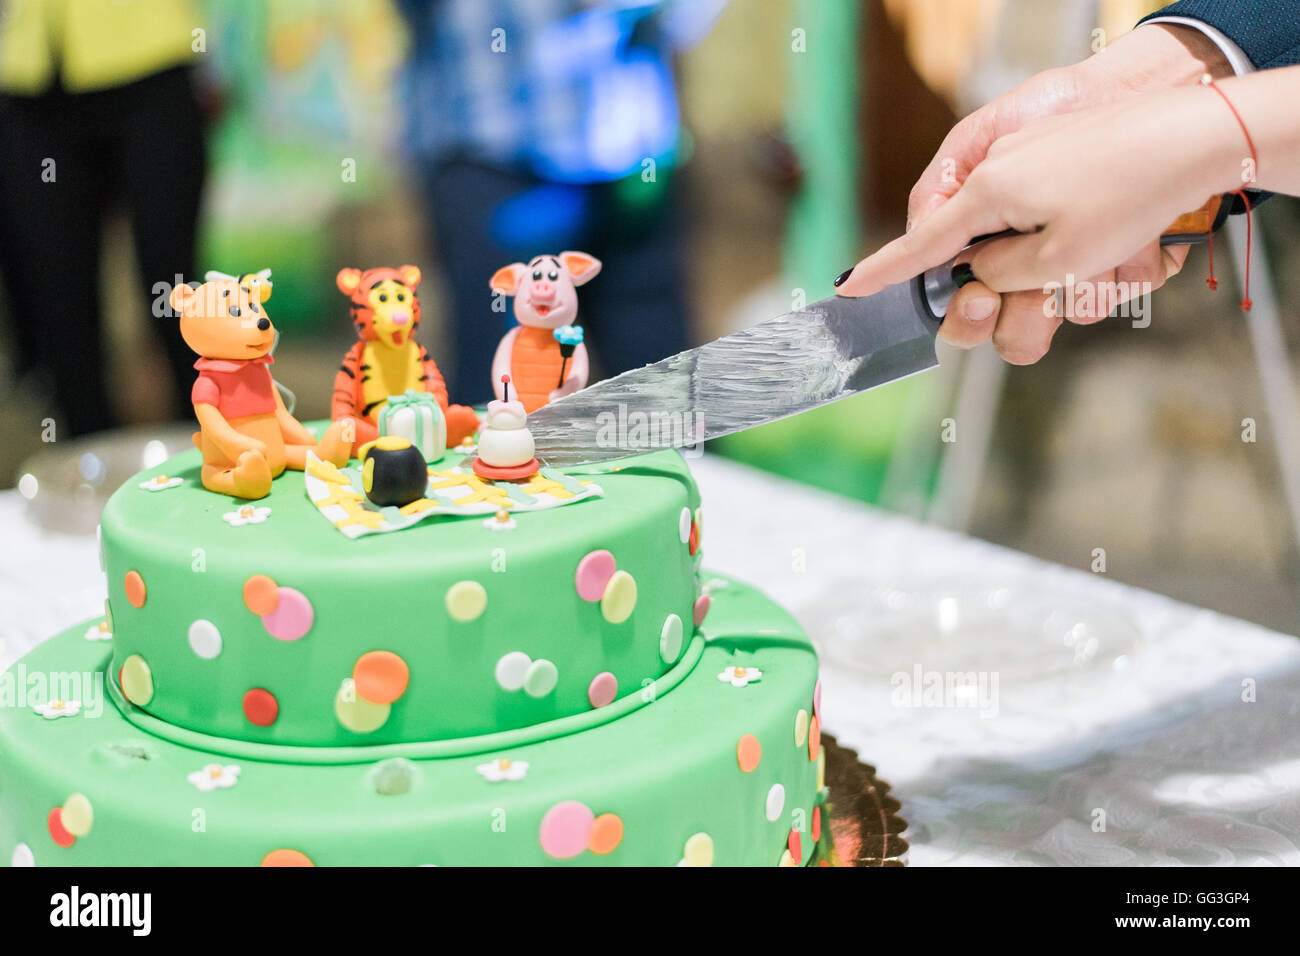 Slicing the Birthday cake with candles and Winnie the Pooh by Disney Stock Photo